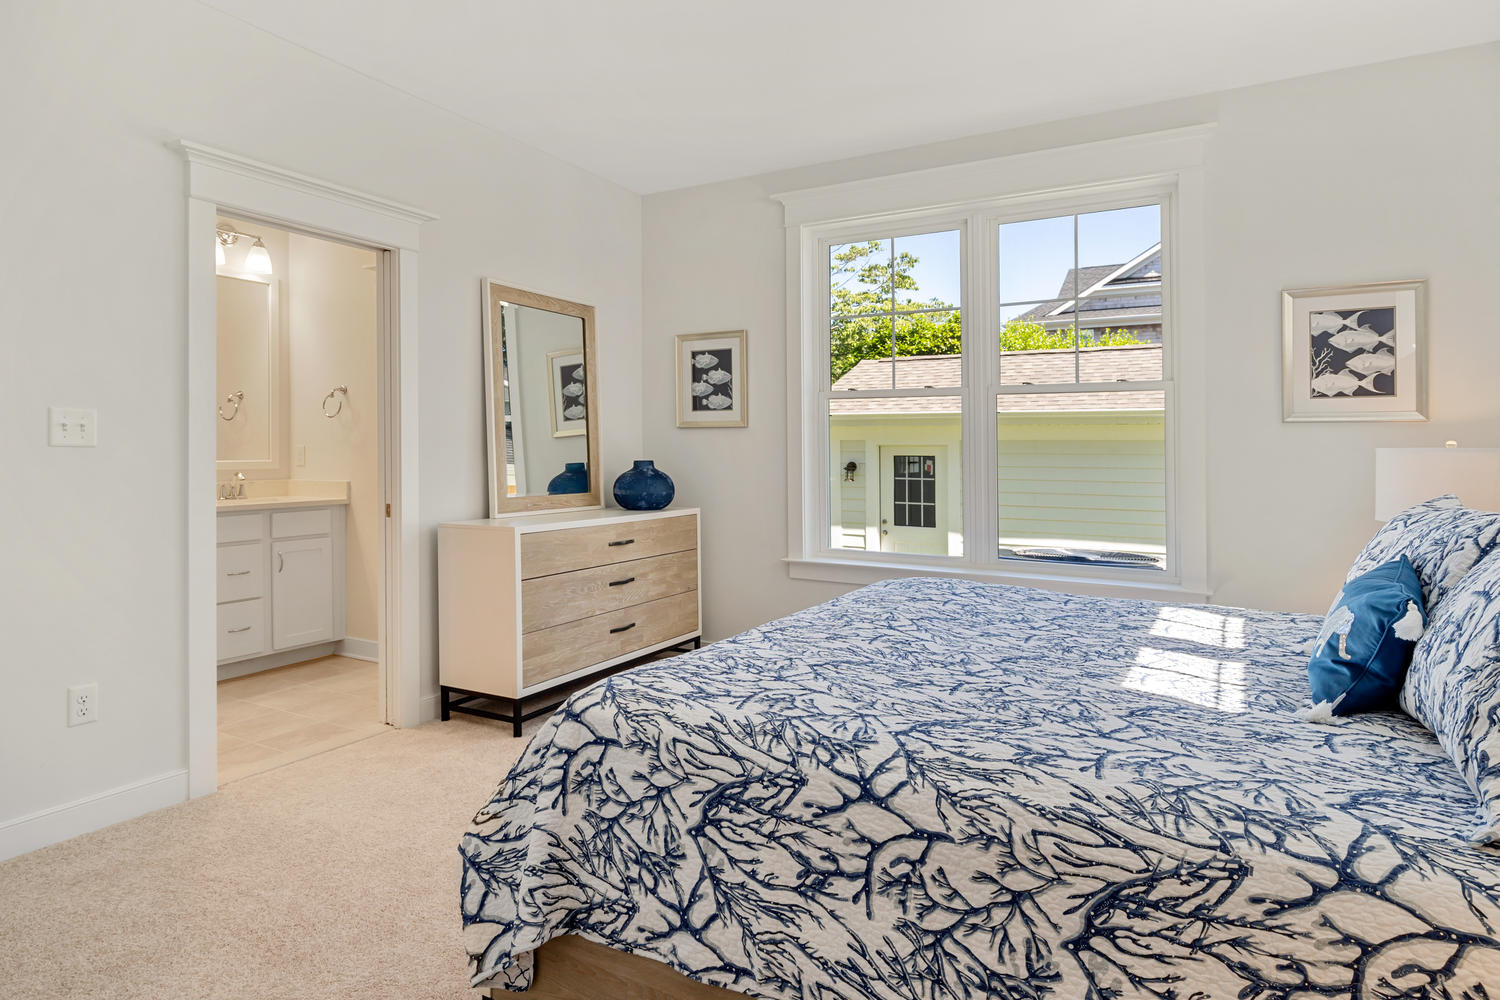 Staged Bedroom with Large Bed, Dresser and Large Exterior Windows